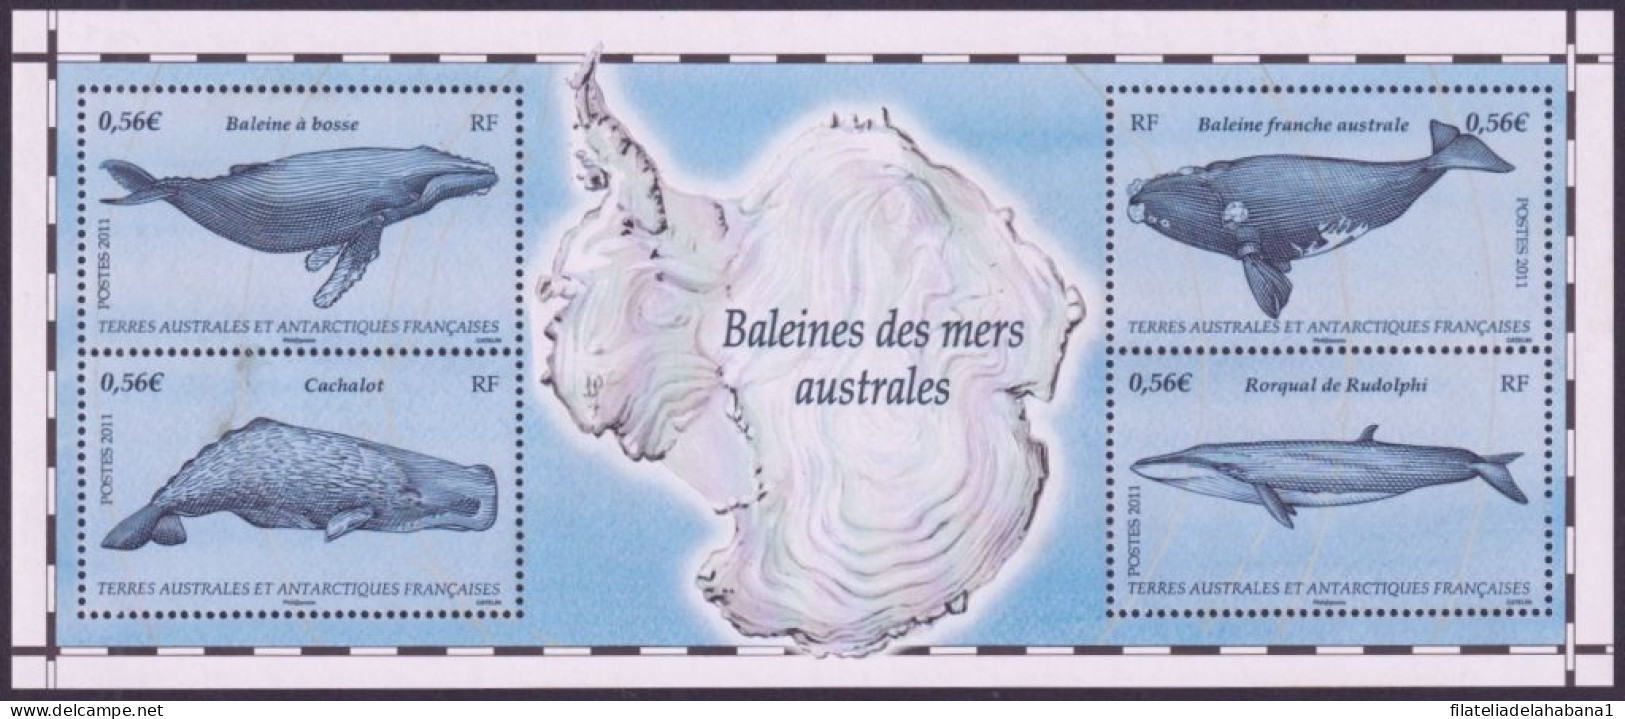 F-EX49834 TAAF FRANCE ANTARCTIC MNH 2011 MARINE WILDLIFE FISH WHALE OF SOUTHERN. - Ballenas